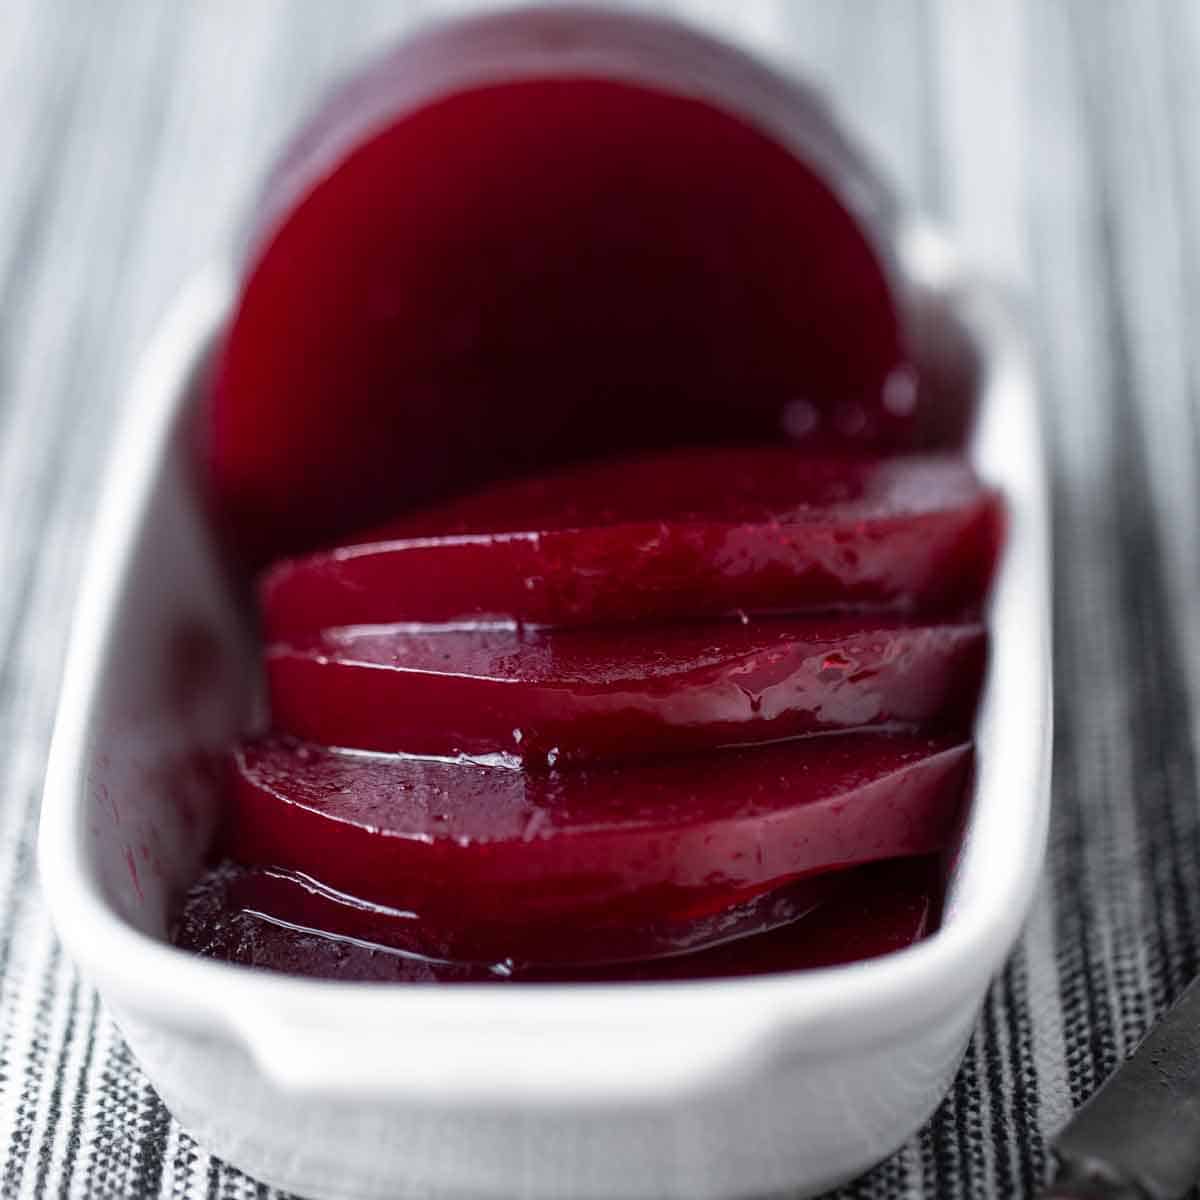 Jellied Cranberry Sauce is a homemade cranberry sauce recipe that is just like the old fashioned canned cranberry sauce only made from scratch with fresh cranberries, raspberries and oranges. cranberry sauce recipe | canned cranberry sauce | homemade cranberry sauce | canning cranberry jelly